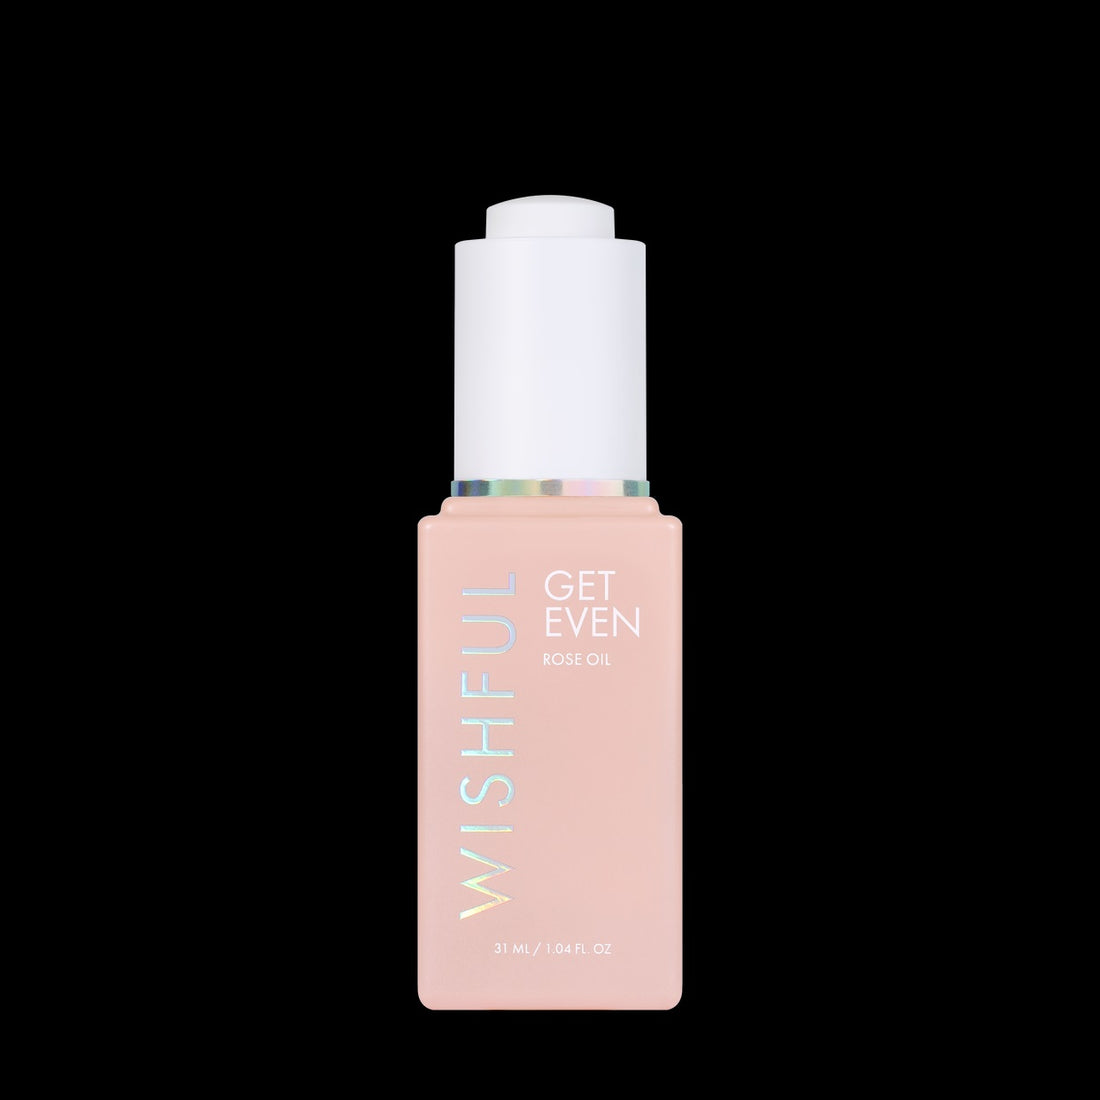 Wishful Get Even Rose Oil full size 30ml